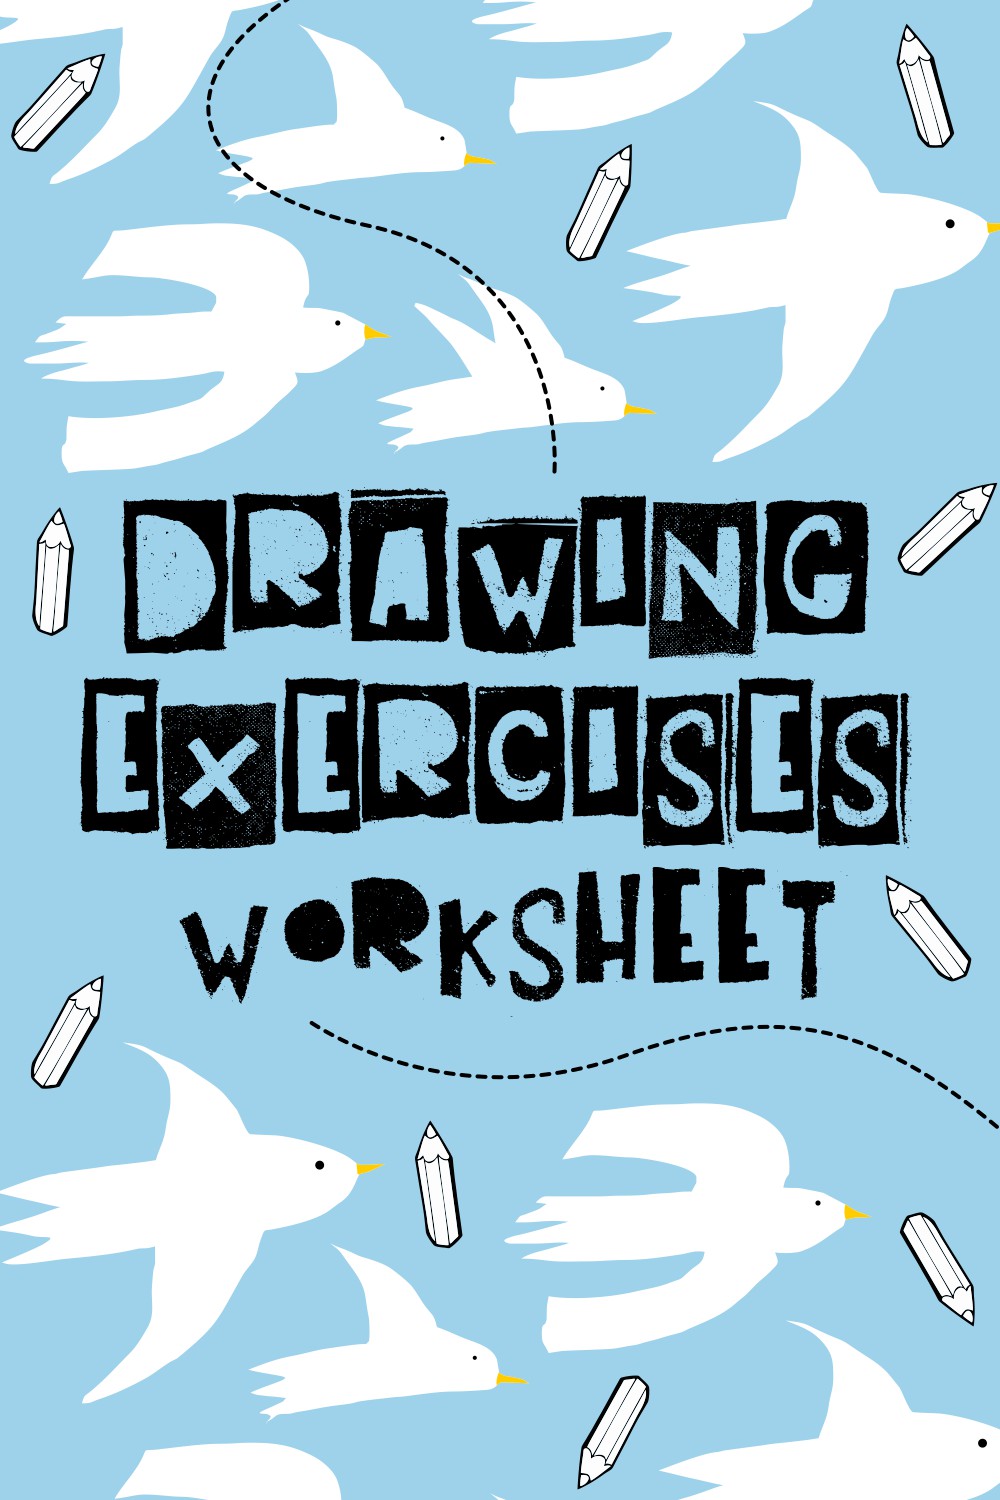 18 Images of Drawing Exercises Worksheets